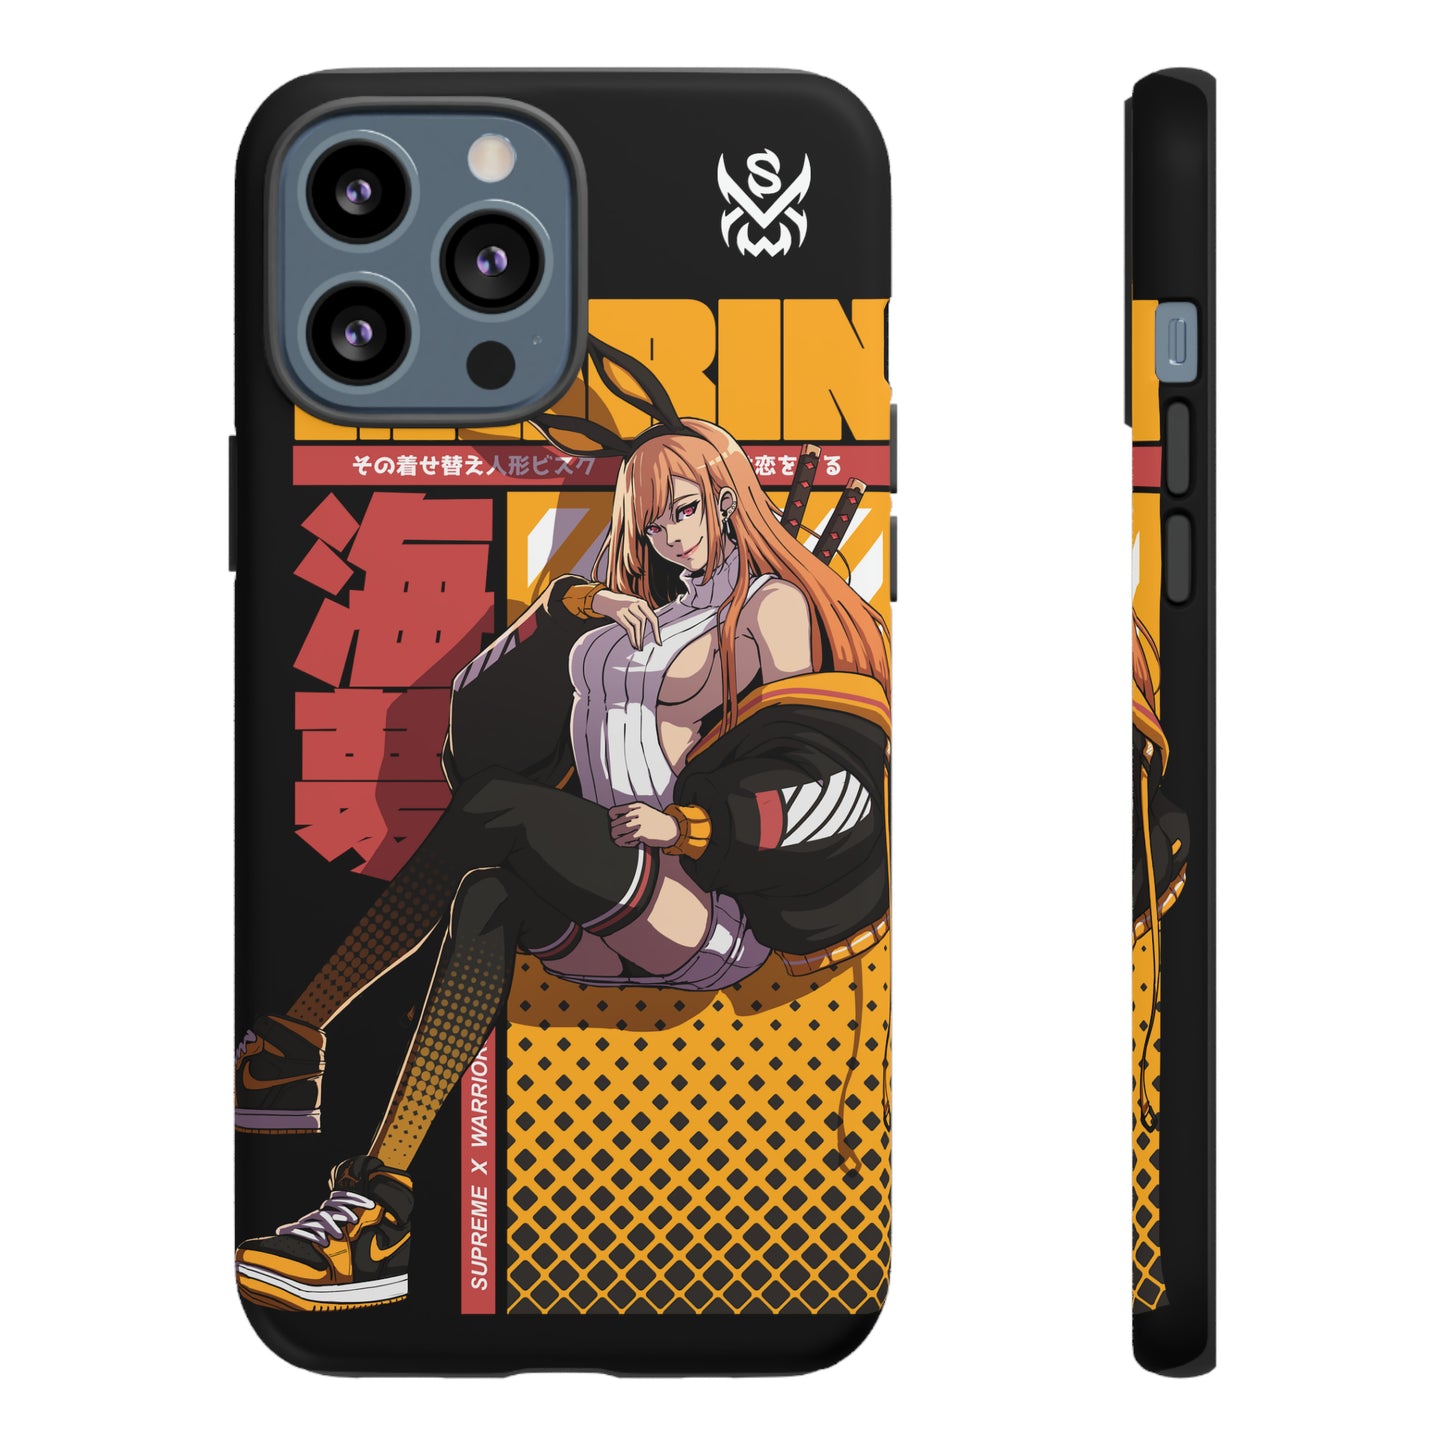 Marin / iPhone Case - LIMITED